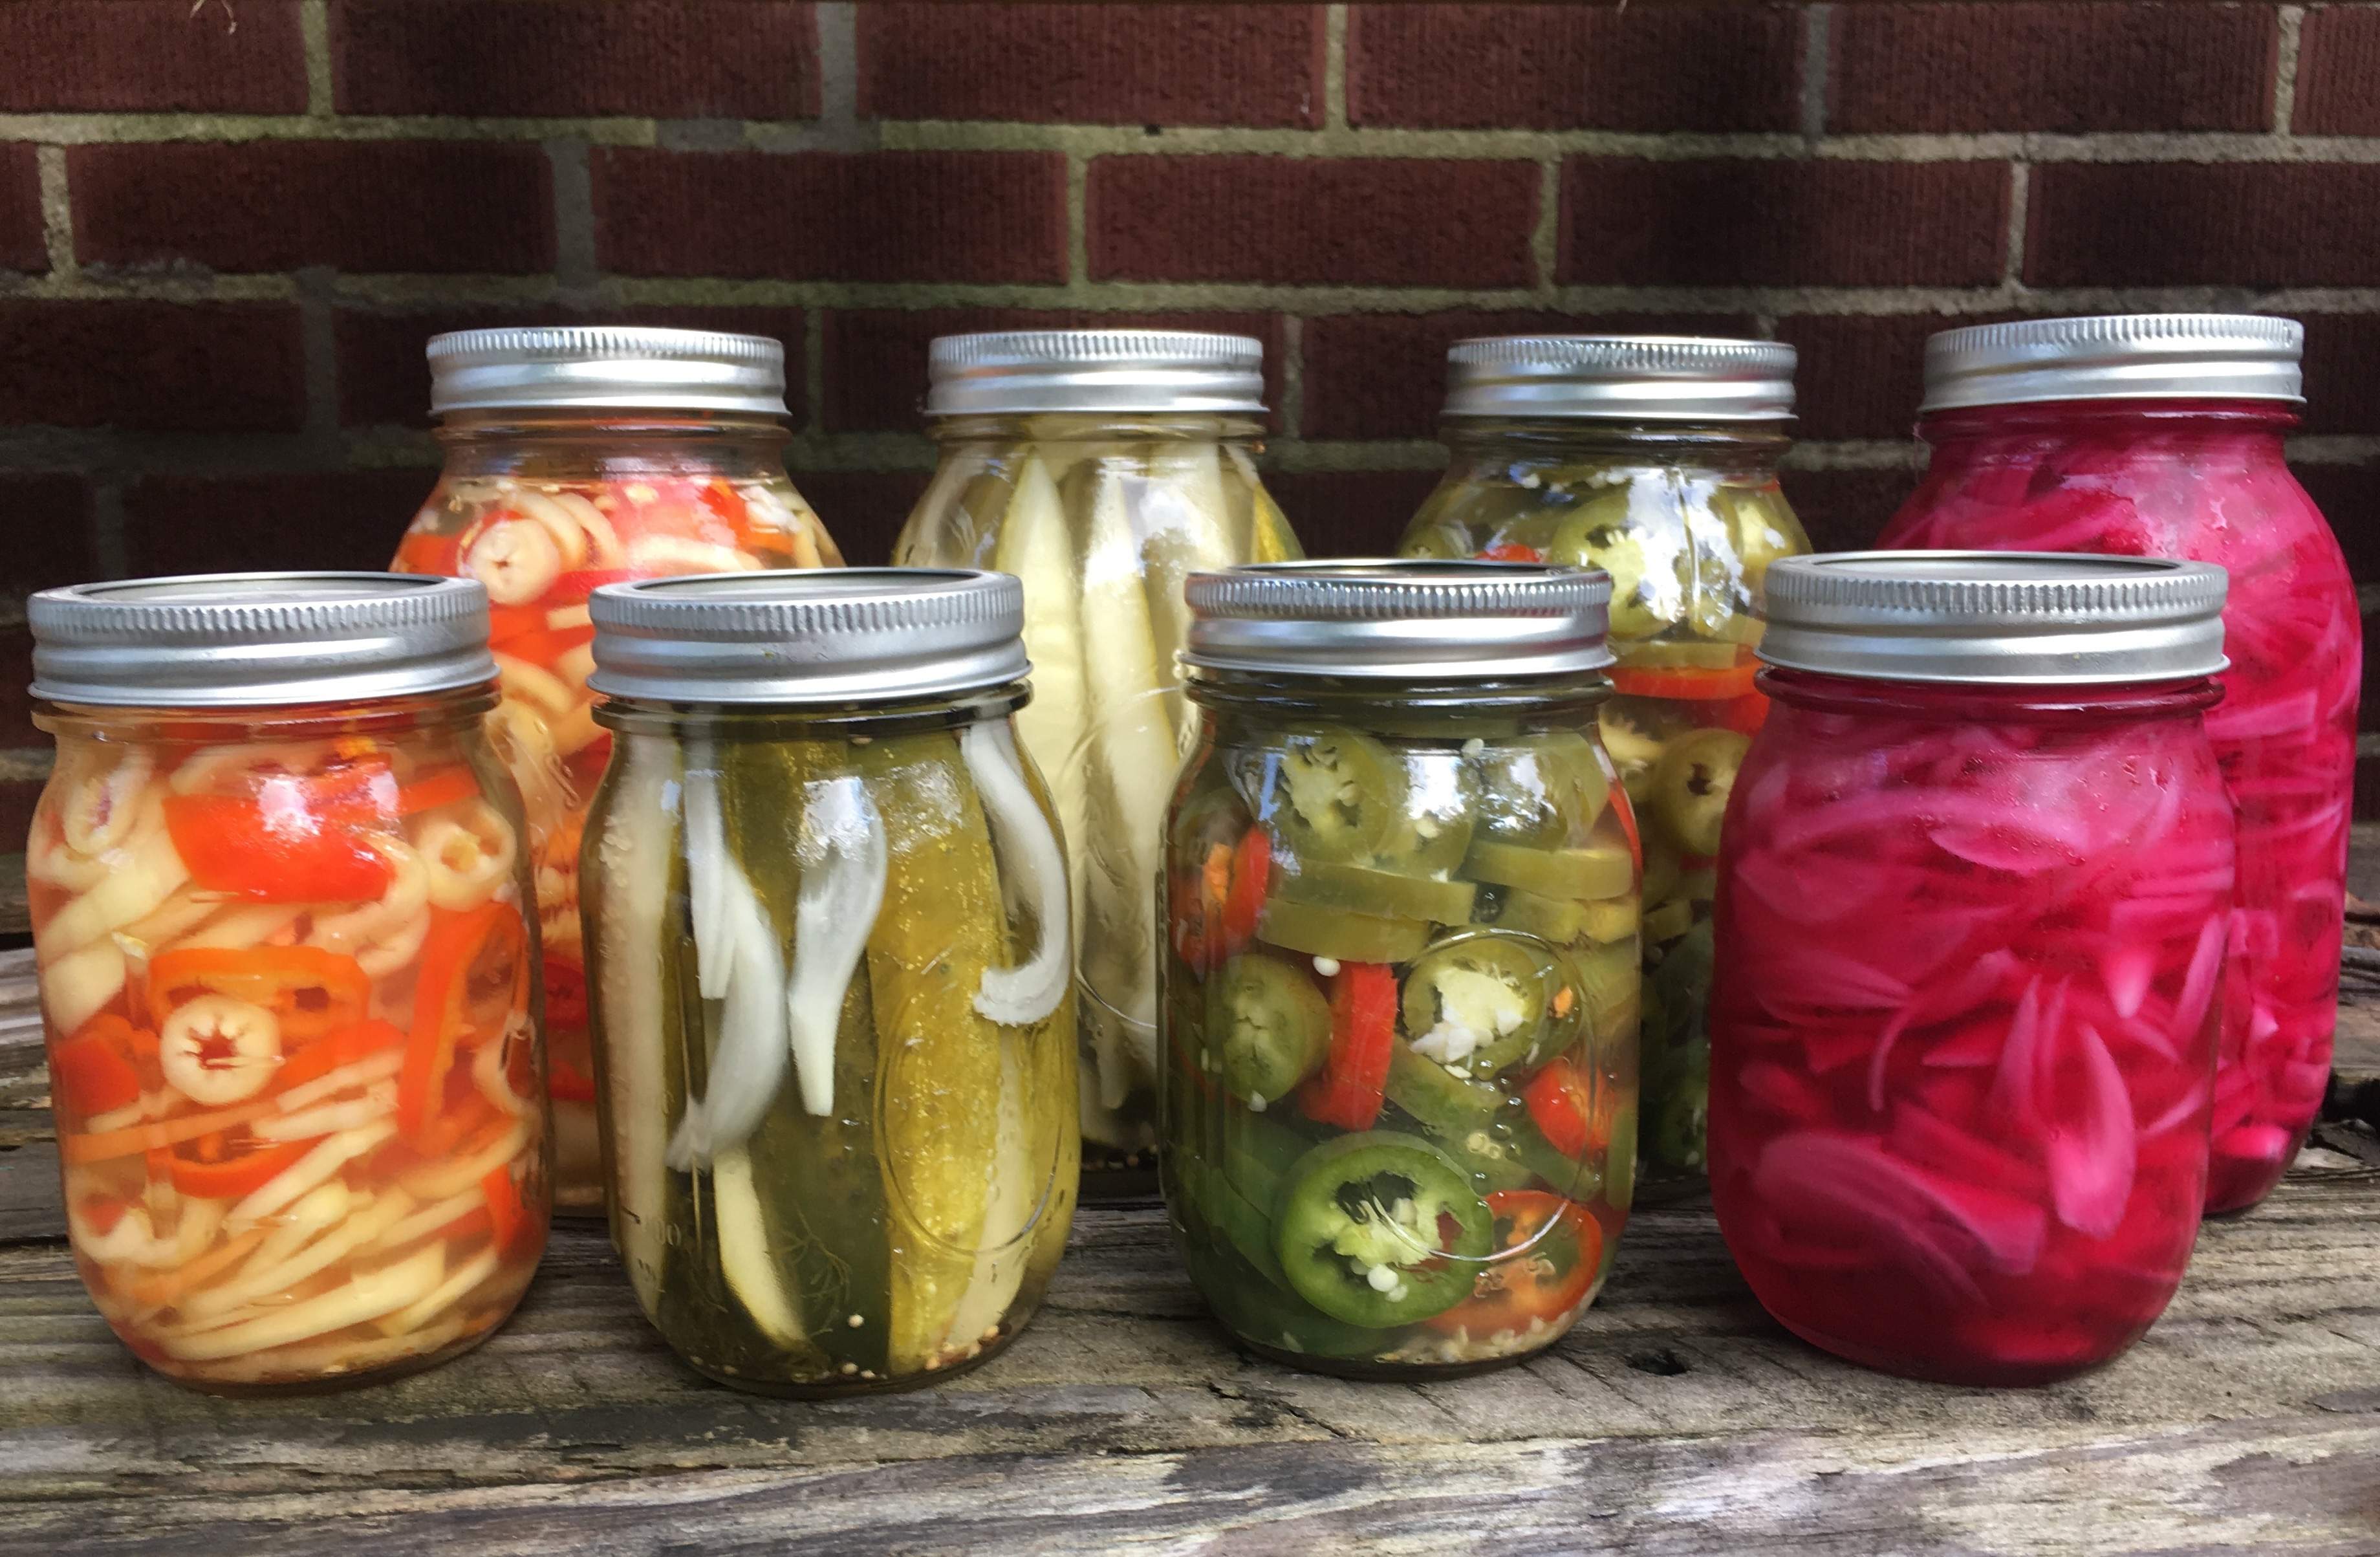 WV Culinary Team: Pickling peppers, cucumbers and onions in the fridge